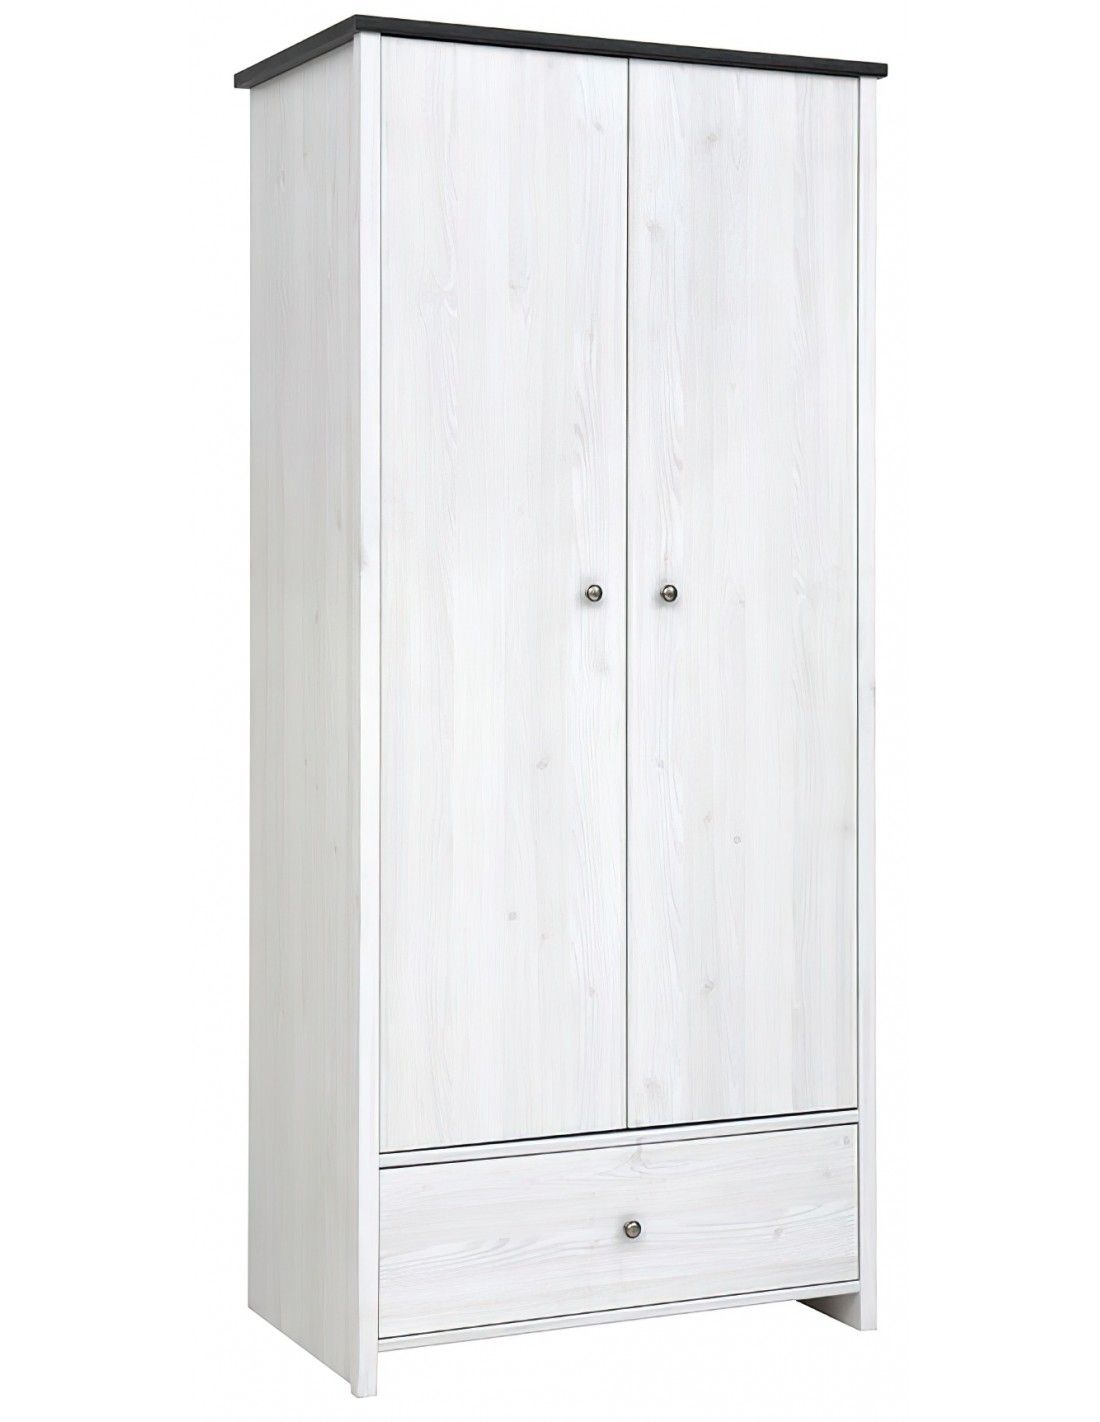 Hampshire 2 Door 1 Drawer Wardrobe – Sibu Larch Light/larico Pine Intended For Hampshire Wardrobes (View 6 of 15)